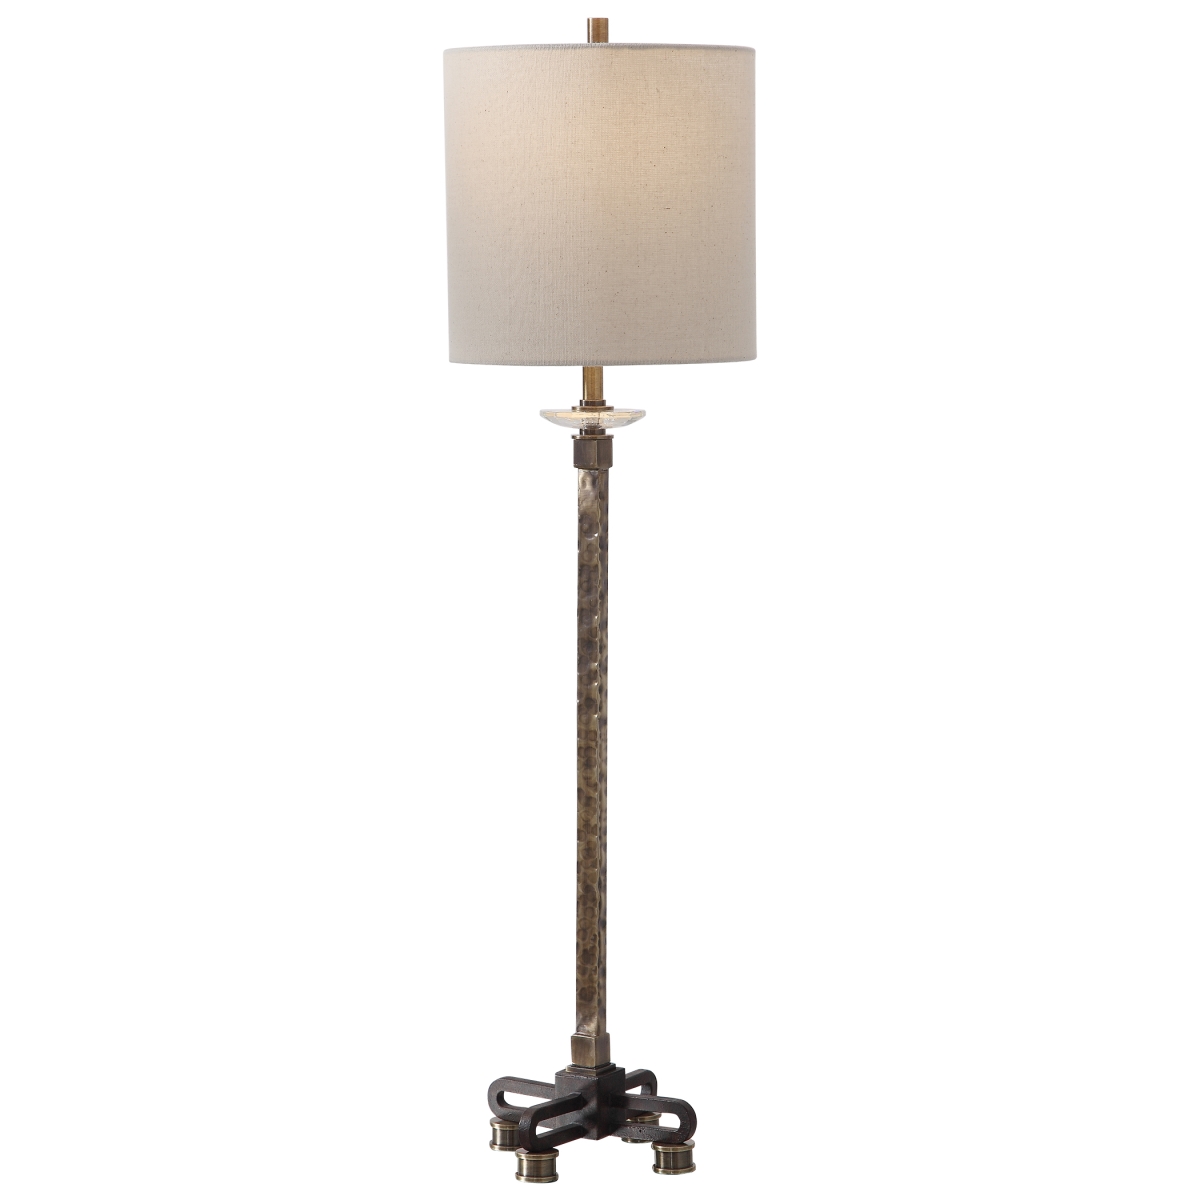 Picture of 212 Main 29690-1 Parnell Industrial Buffet Lamp